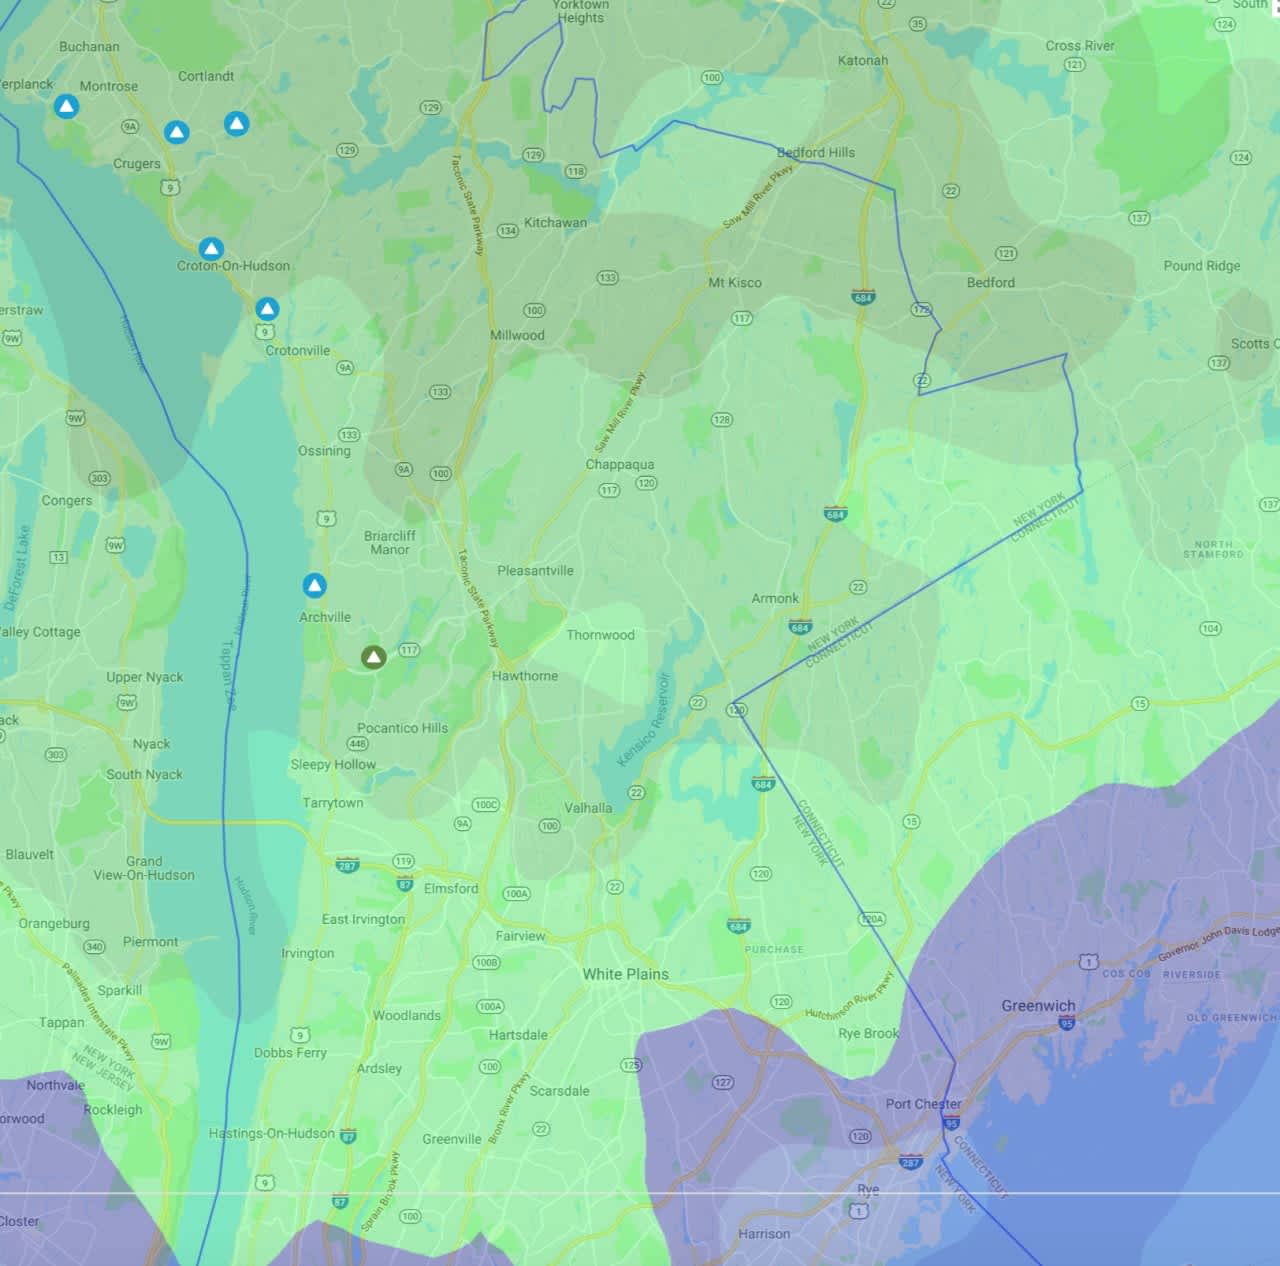 The Con Edison Outage Map as of 4:15 on Friday afternoon.